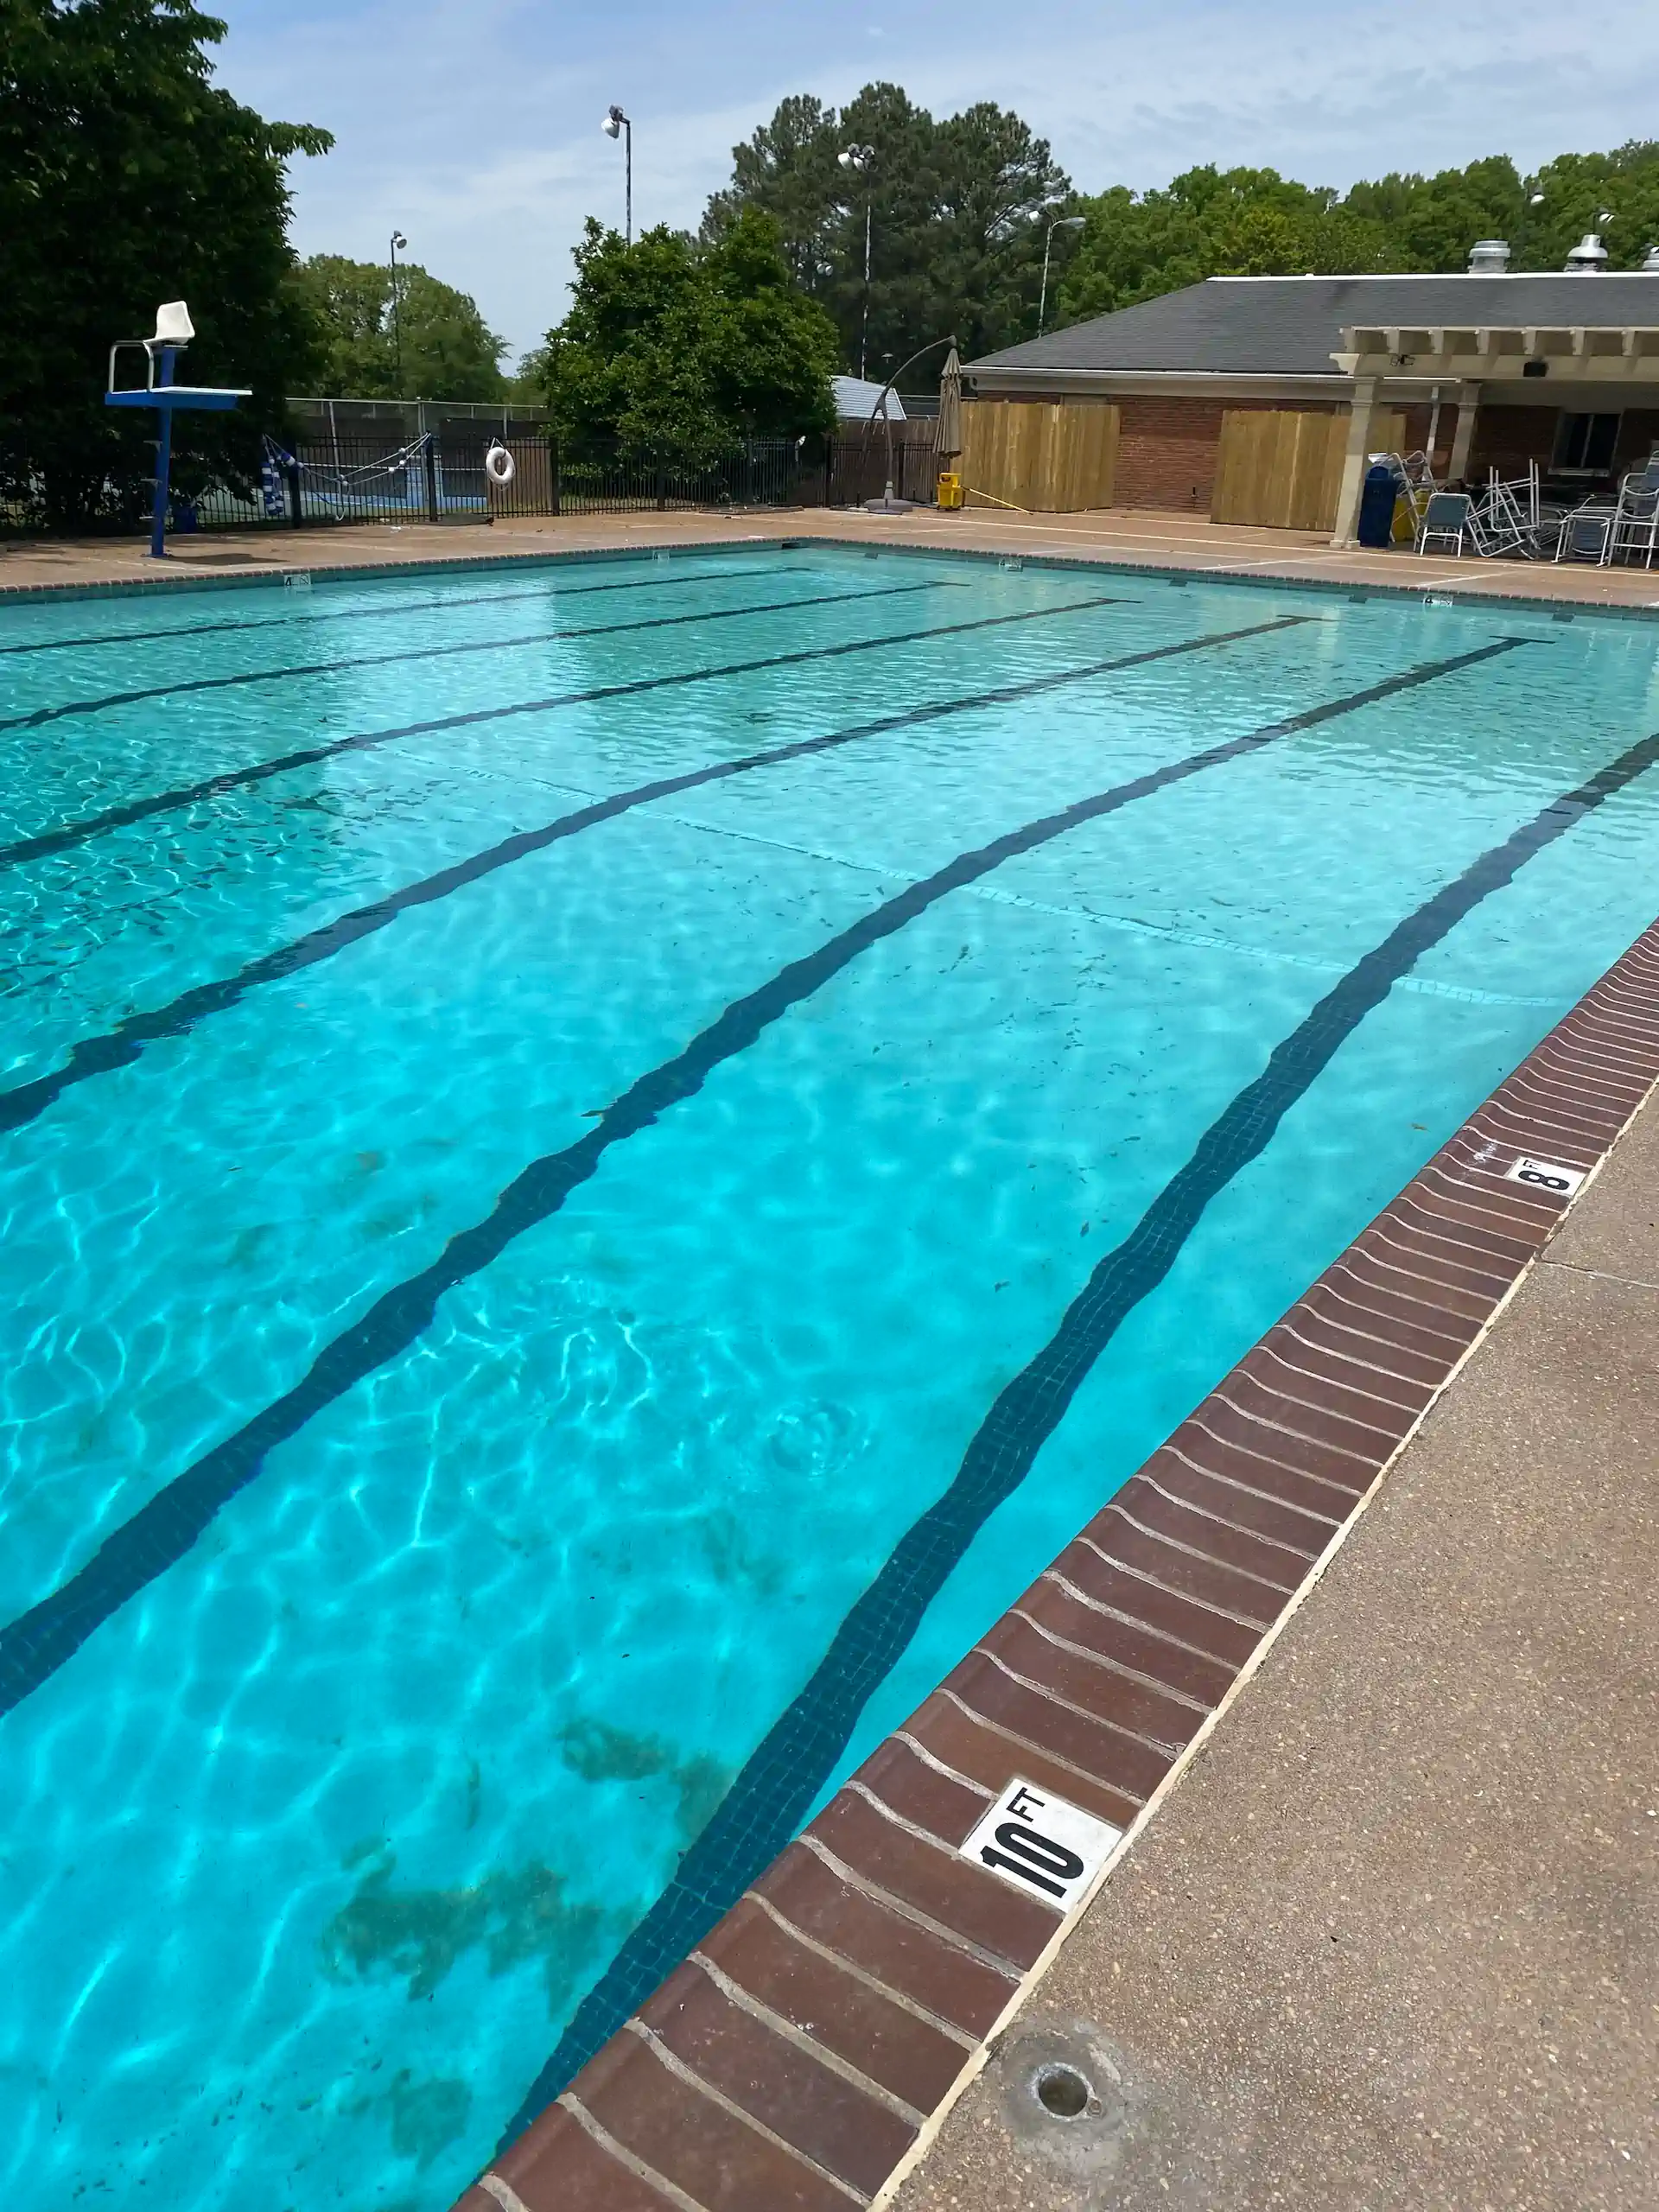 windyke country club commercial pools services ogden pools